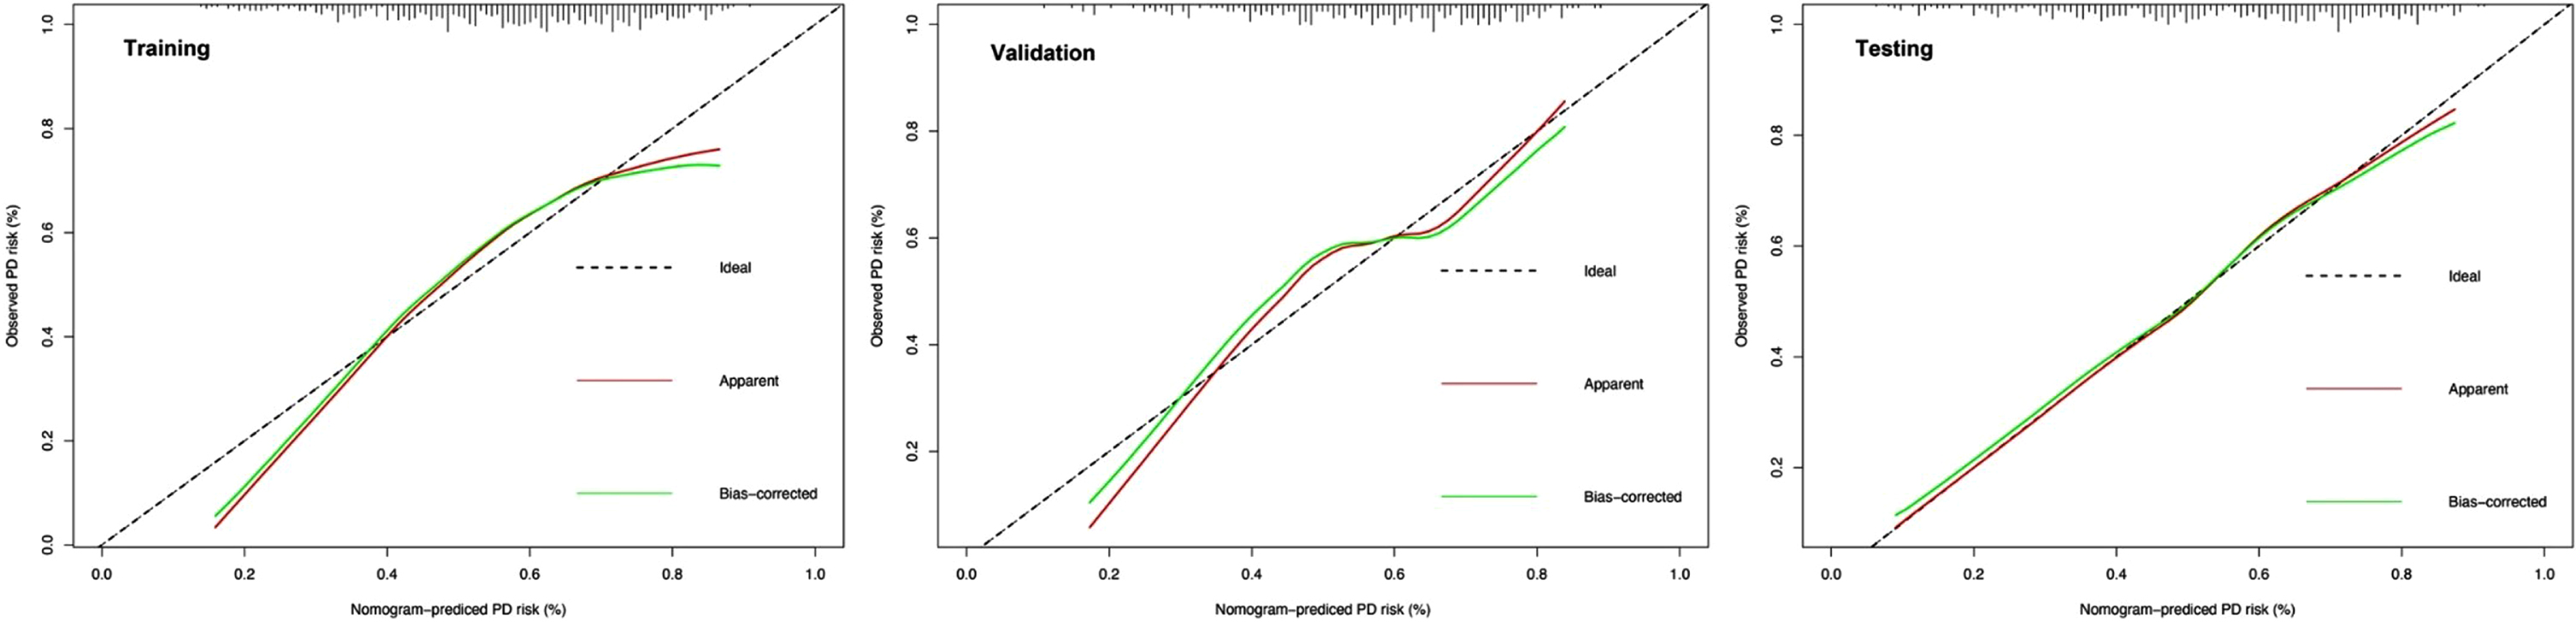 Calibration curves of the nomogram in the training, validation and testing datasets. Shown are the nomogram predicted probability (PP) for early PD on the x-axis and the observed probabilities (OP) on the y-axis. The “Ideal” grey dotted line represents the PP and OP are totally anastomoses. The “Apparent” (red line) represents the comparison of the PP and OP of the nomogram, while the “Bias-corrected” (green line) indicates an adjusted calibration curve across predicted values by 1,000 bootstrapped samples.